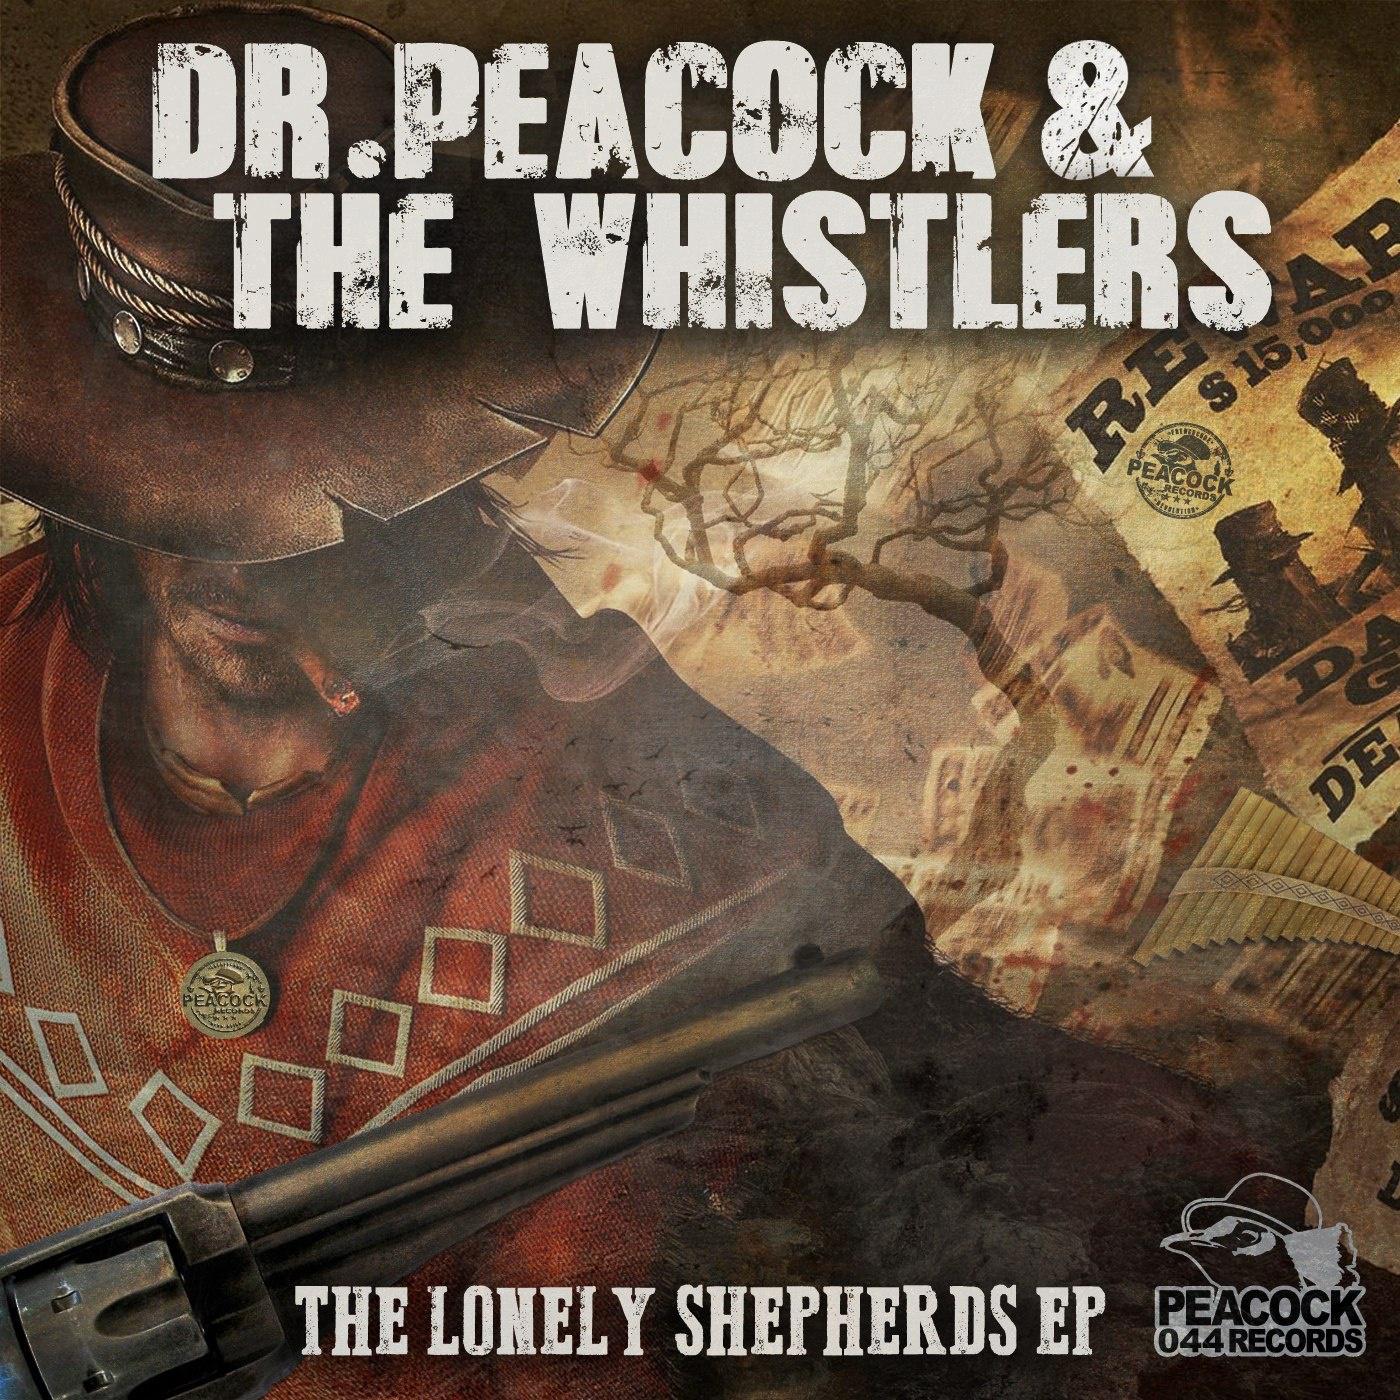 The Lonely Sheperds EP